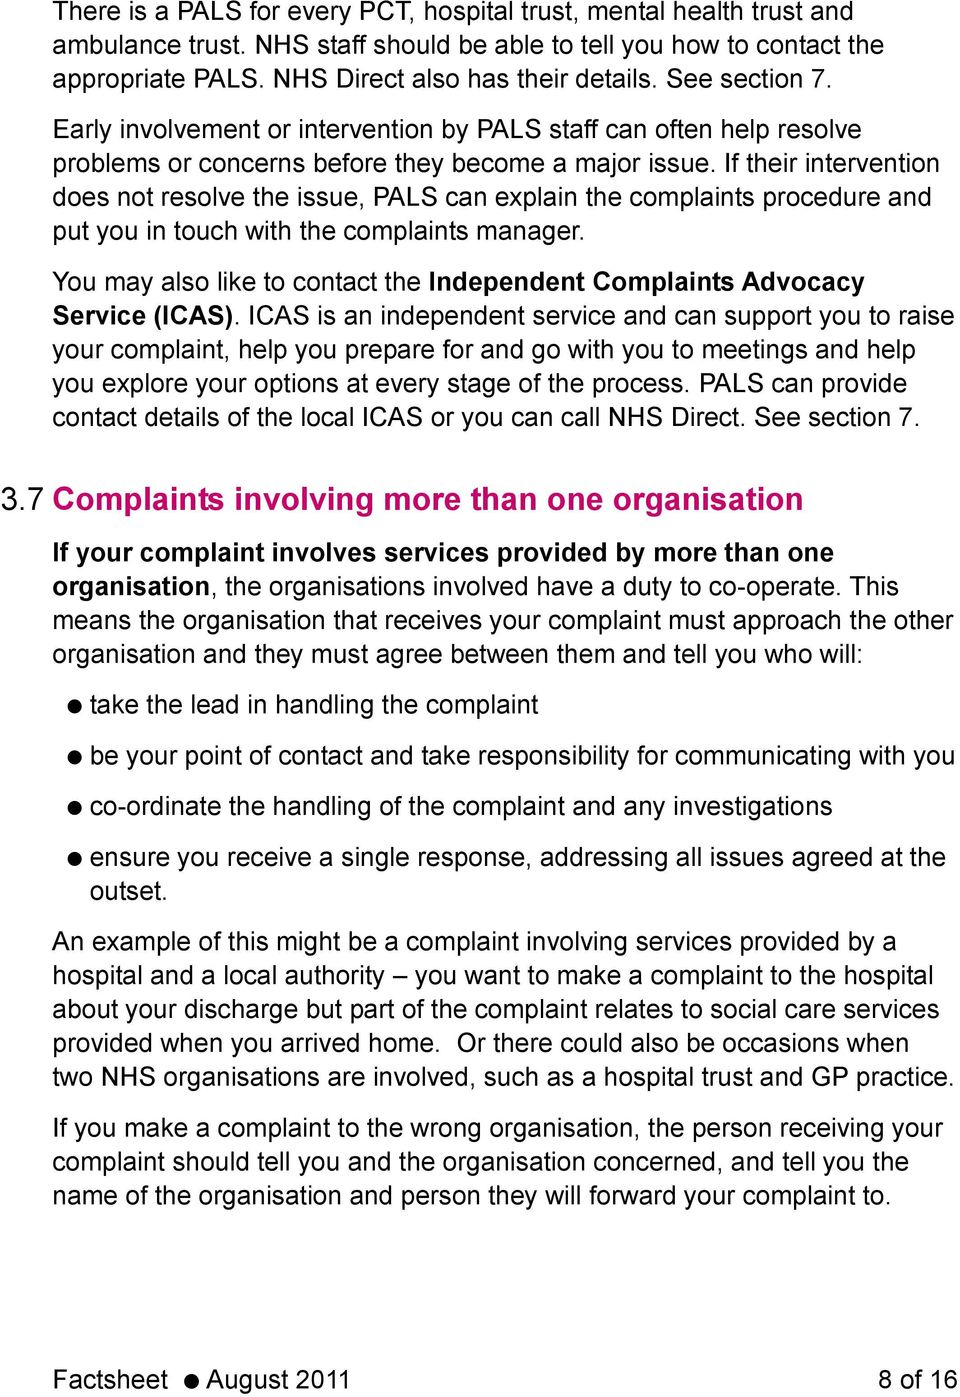 If their intervention does not resolve the issue, PALS can explain the complaints procedure and put you in touch with the complaints manager.